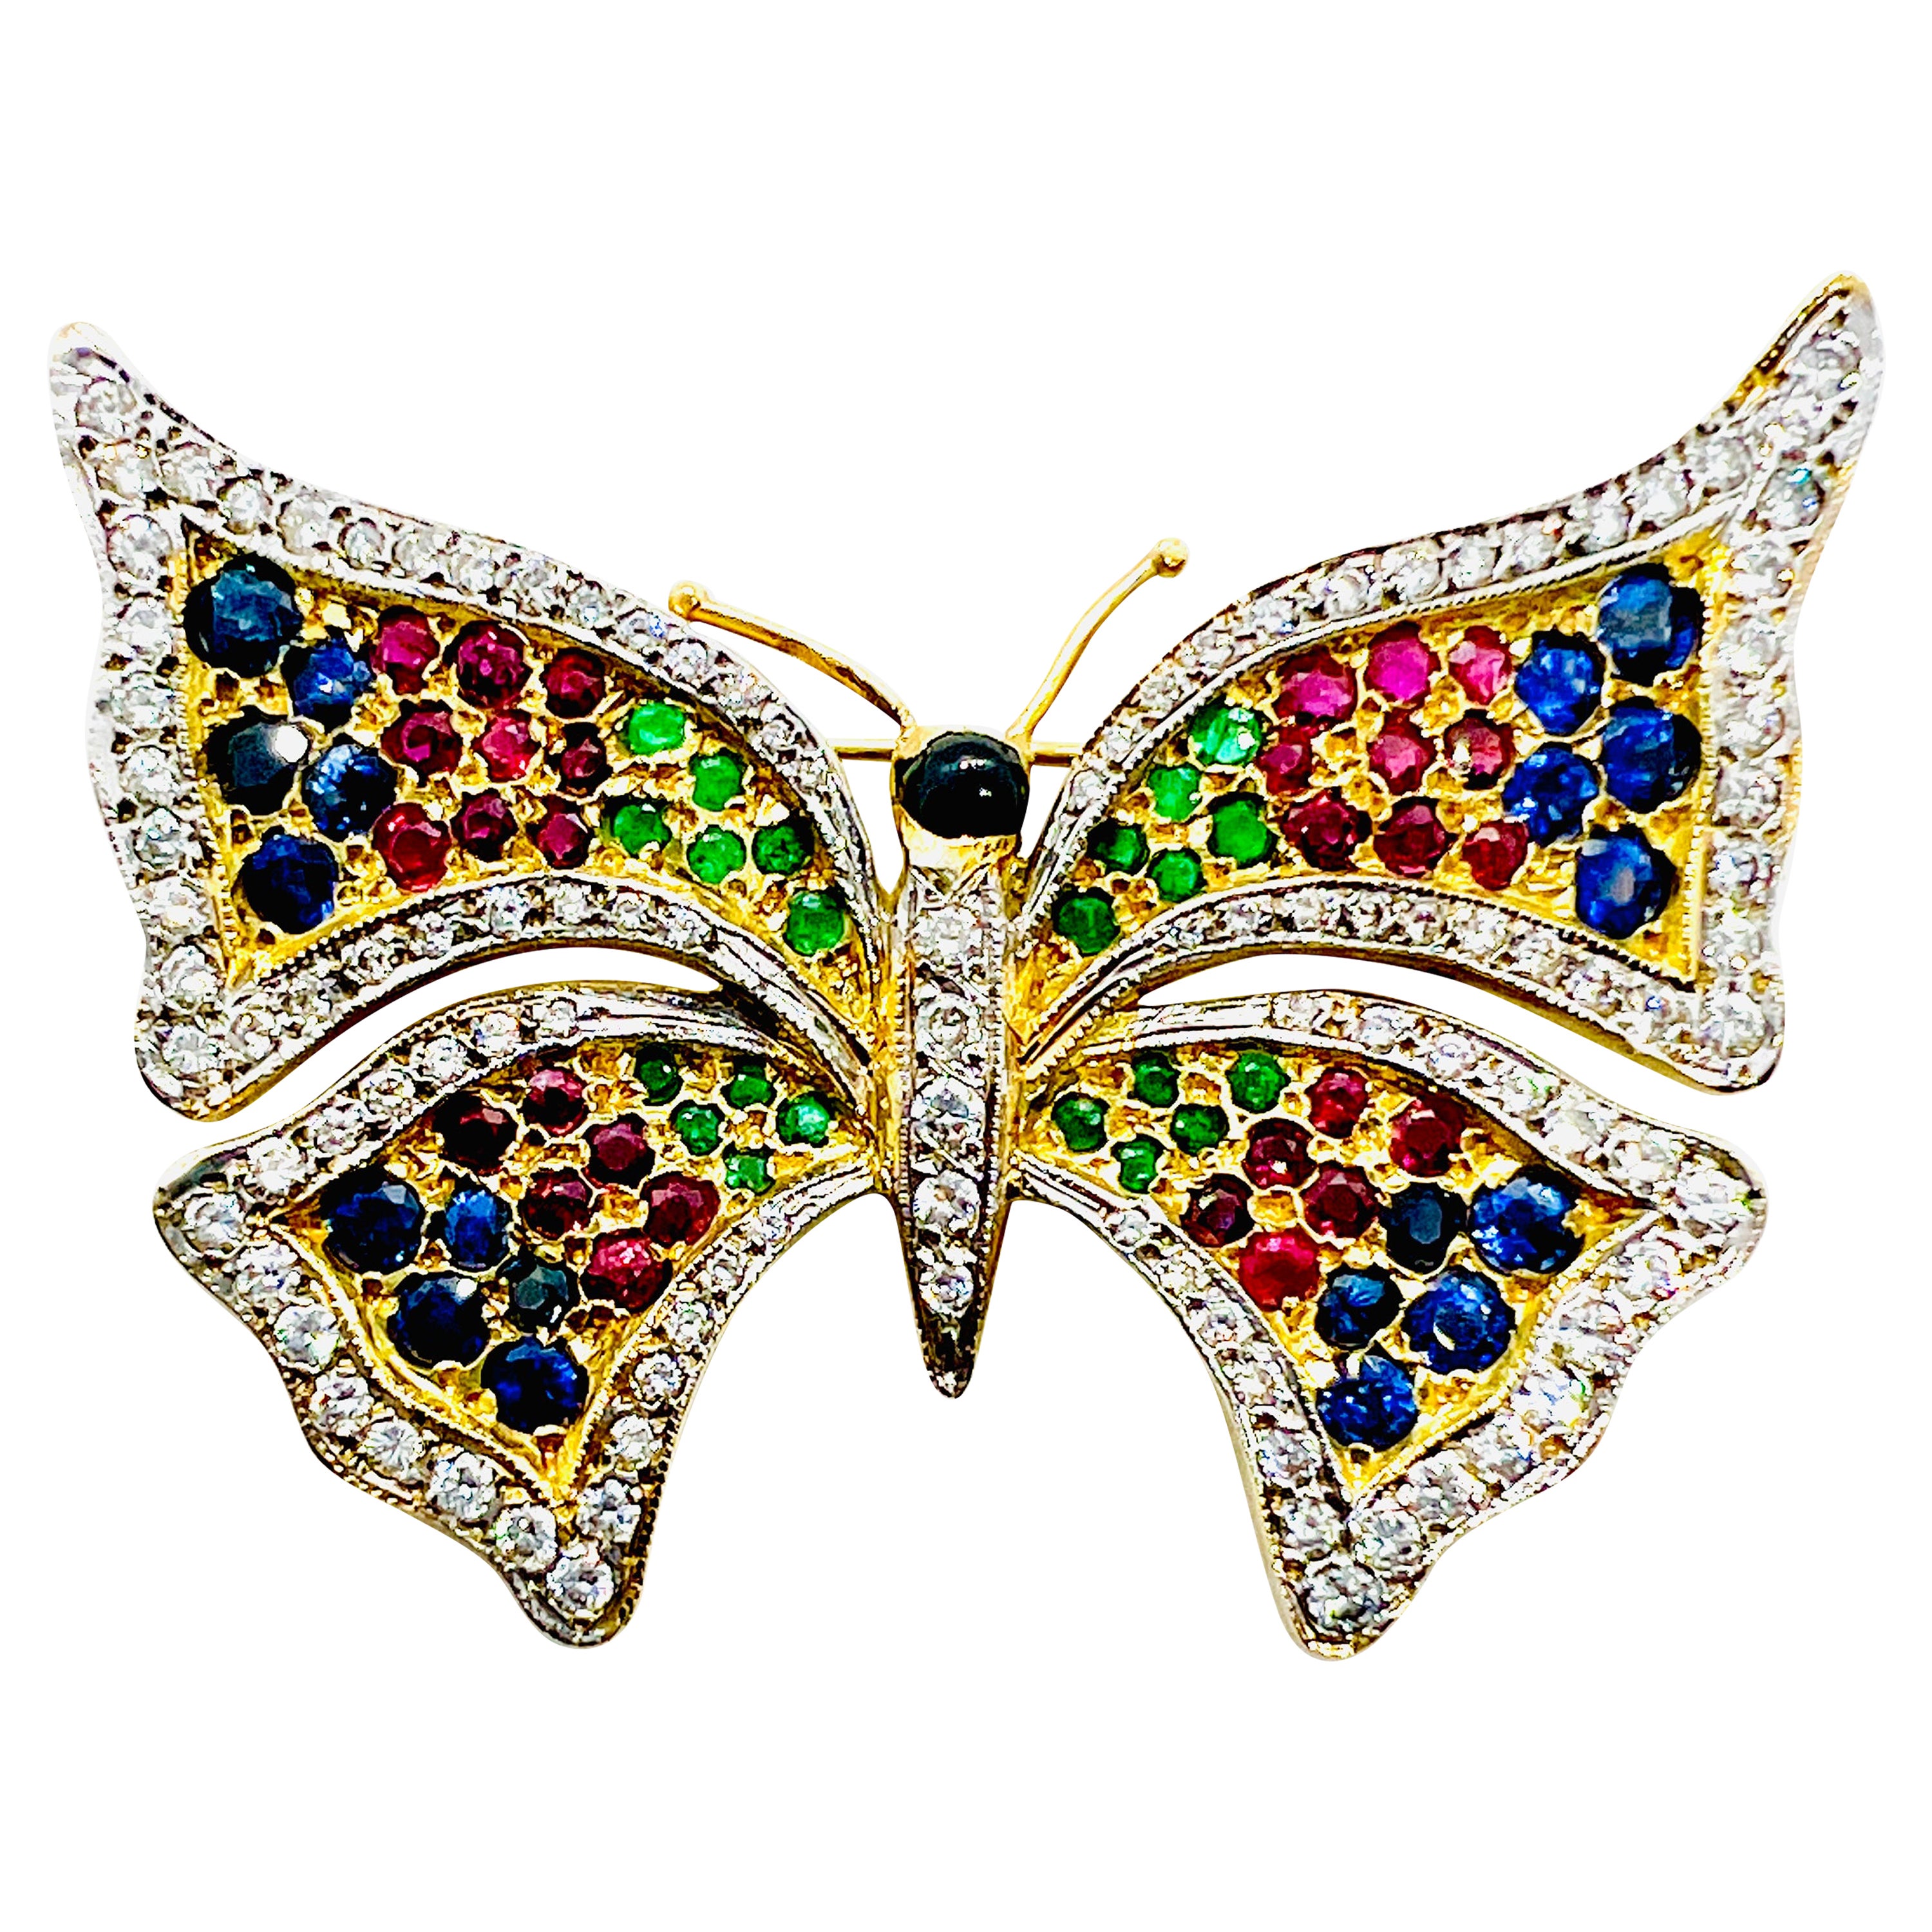 Vintage 18K yellow Gold, Diamond, Sapphire, Ruby & Emerald Butterfly Brooch   For Sale